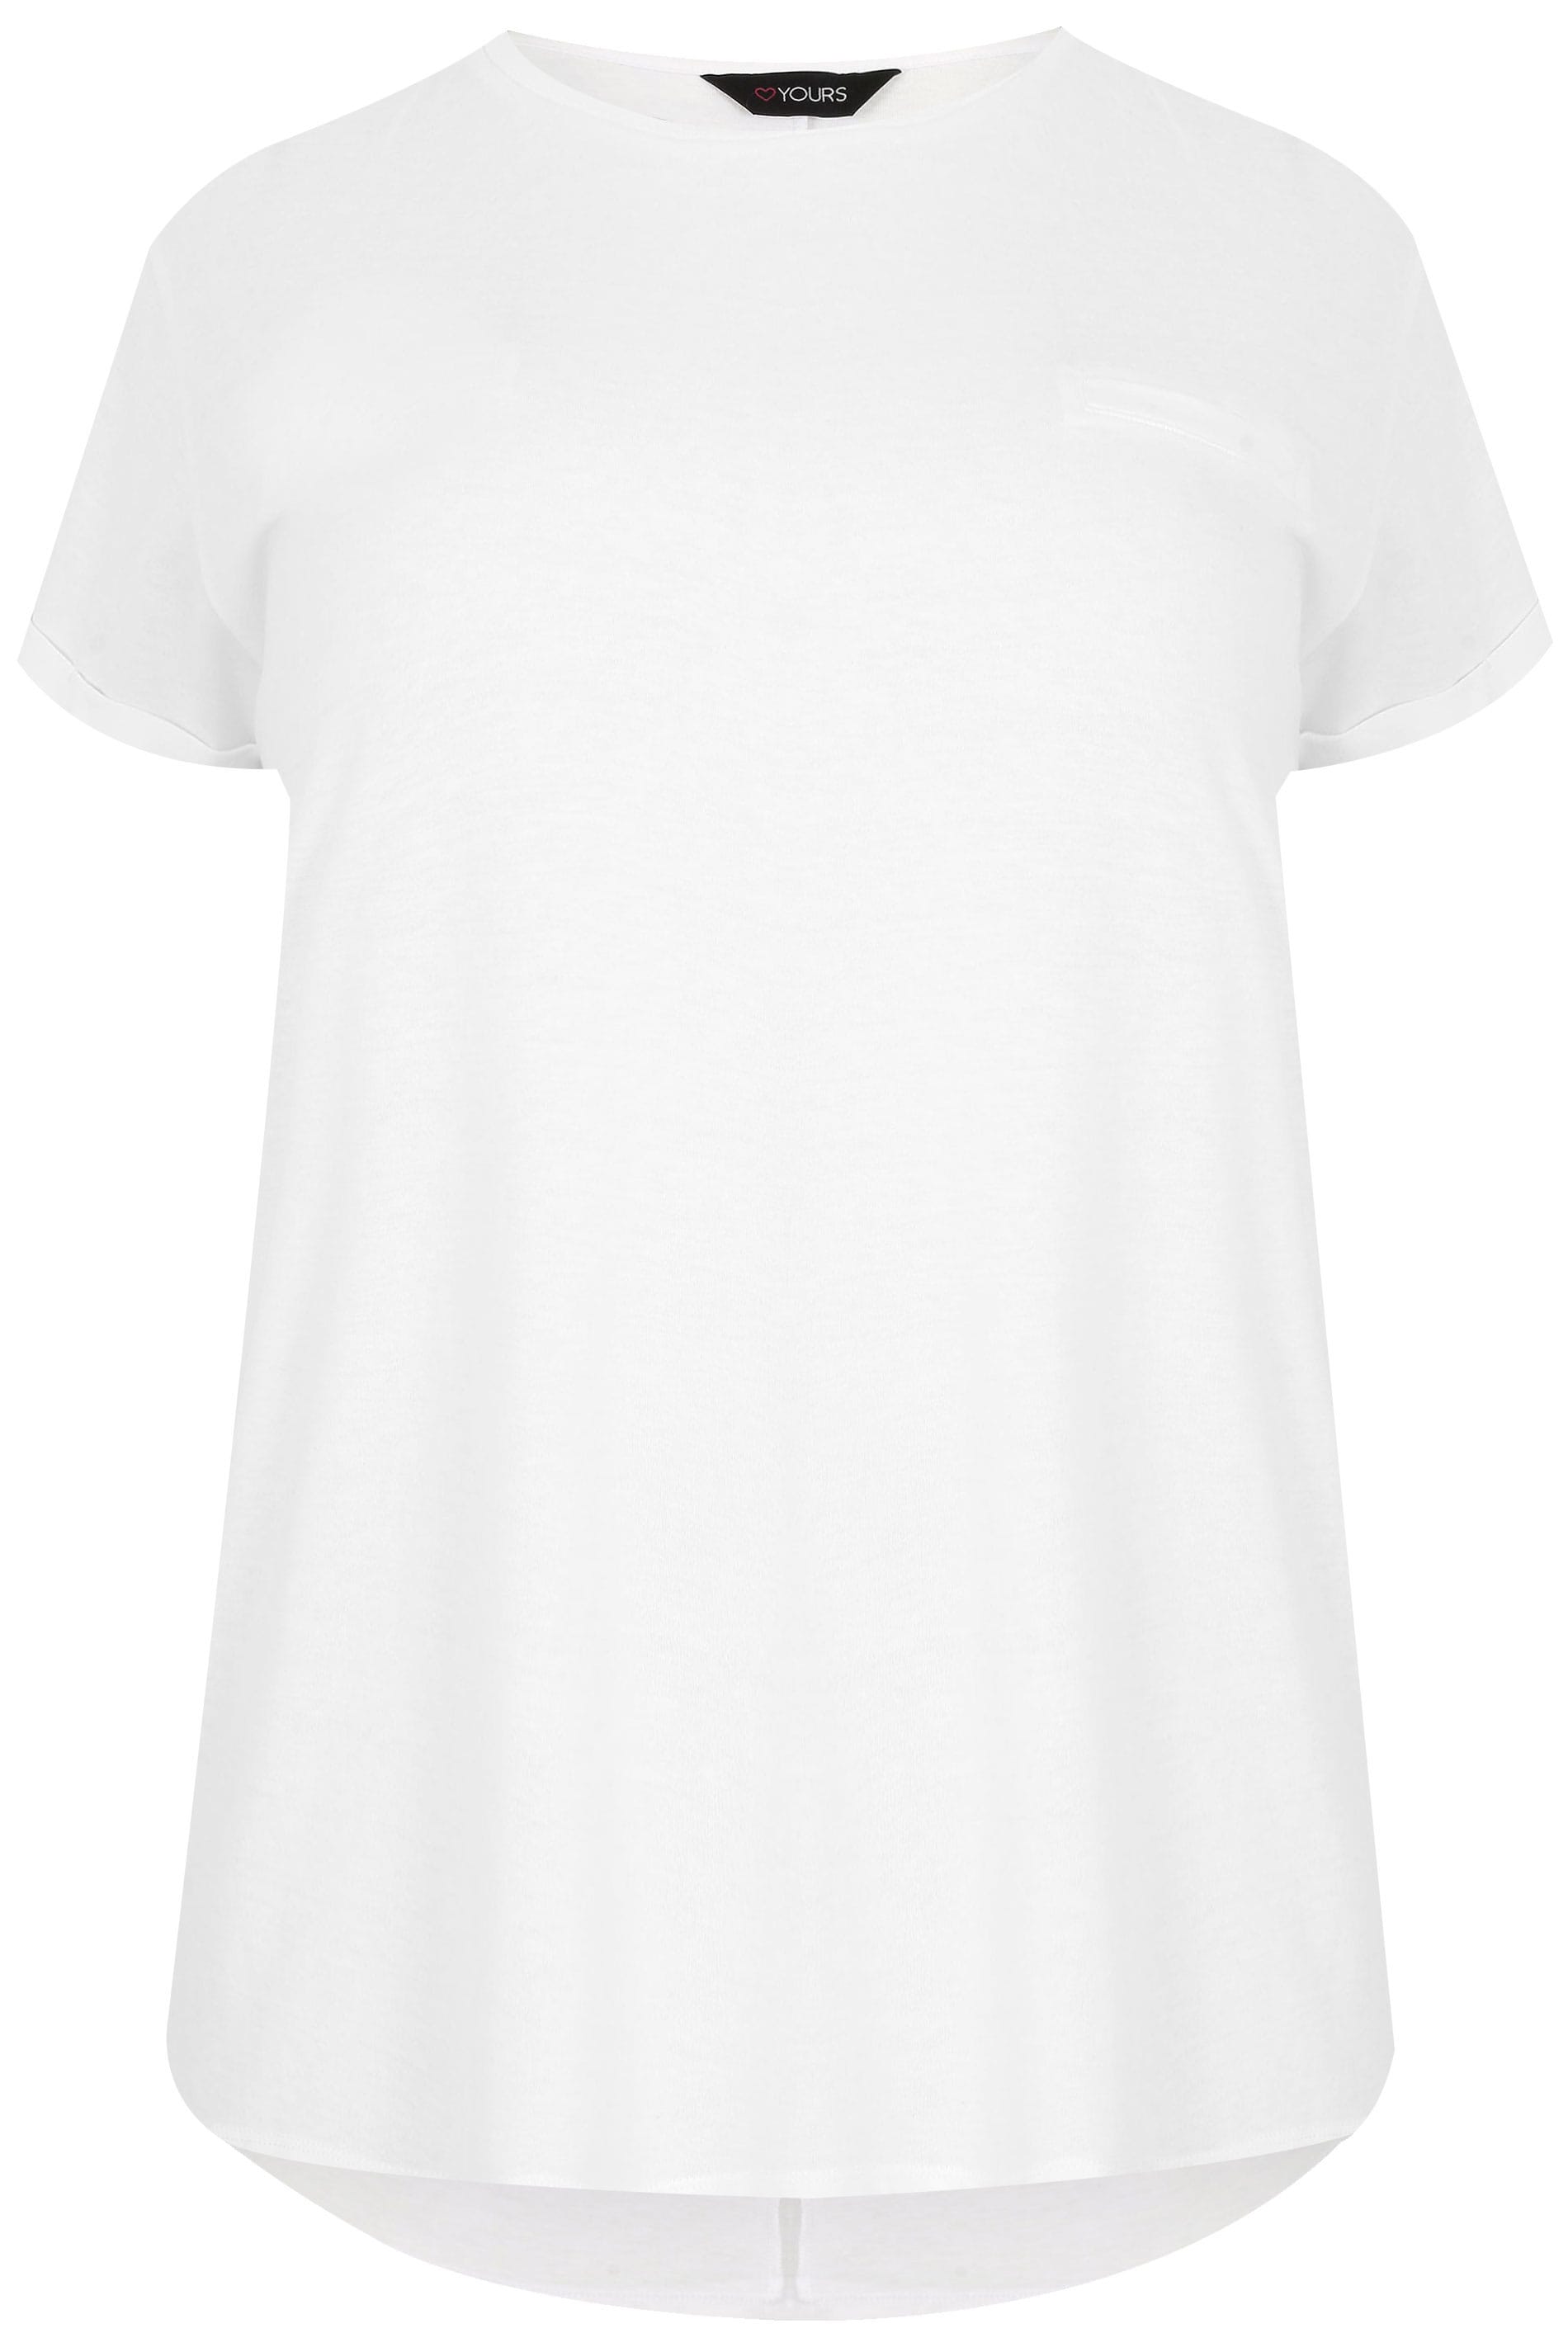 Download Plus Size White Mock Pocket T-Shirt | Sizes 16 to 36 | Yours Clothing